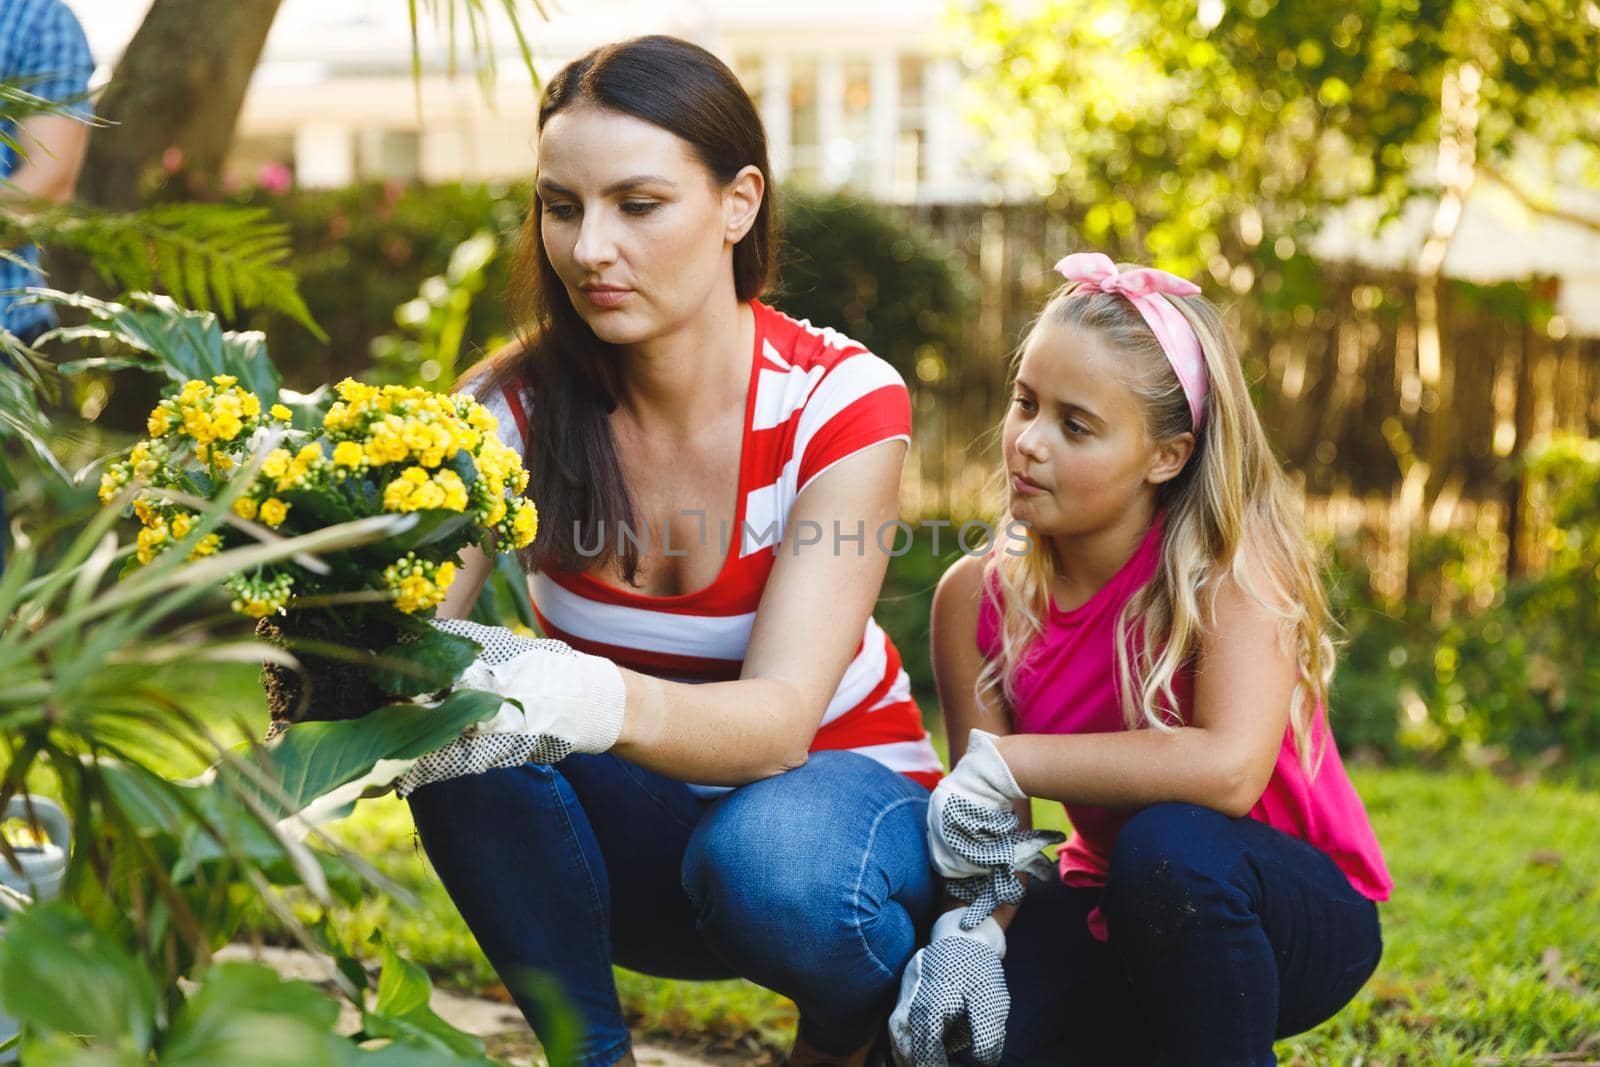 Caucasian mother and daughter working in garden wearing gloves and talking. family enjoying leisure time together gardening at home.